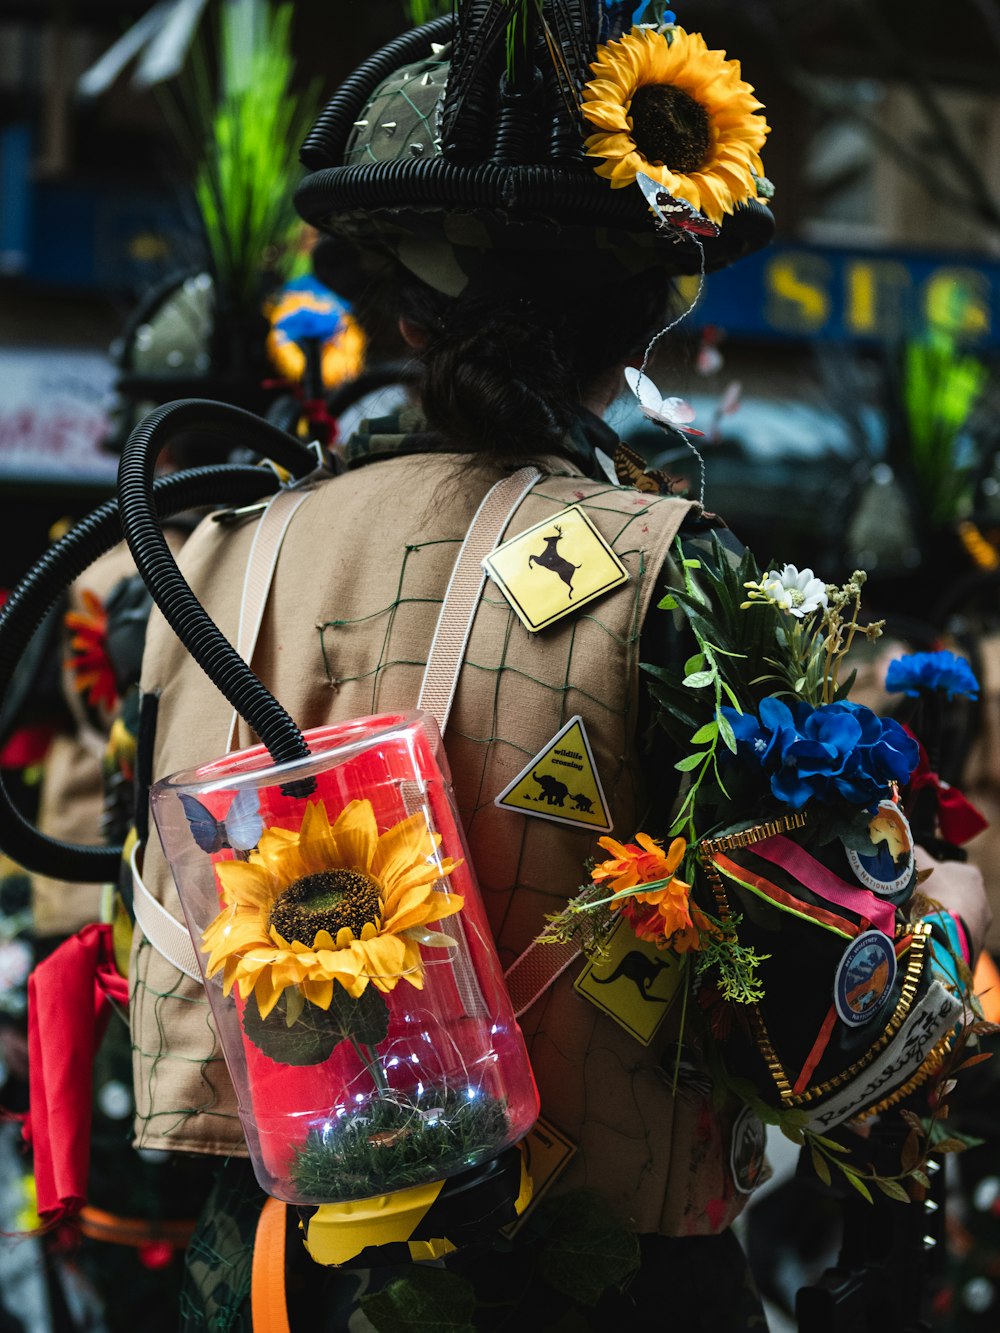 a person wearing a costume with sunflowers on it